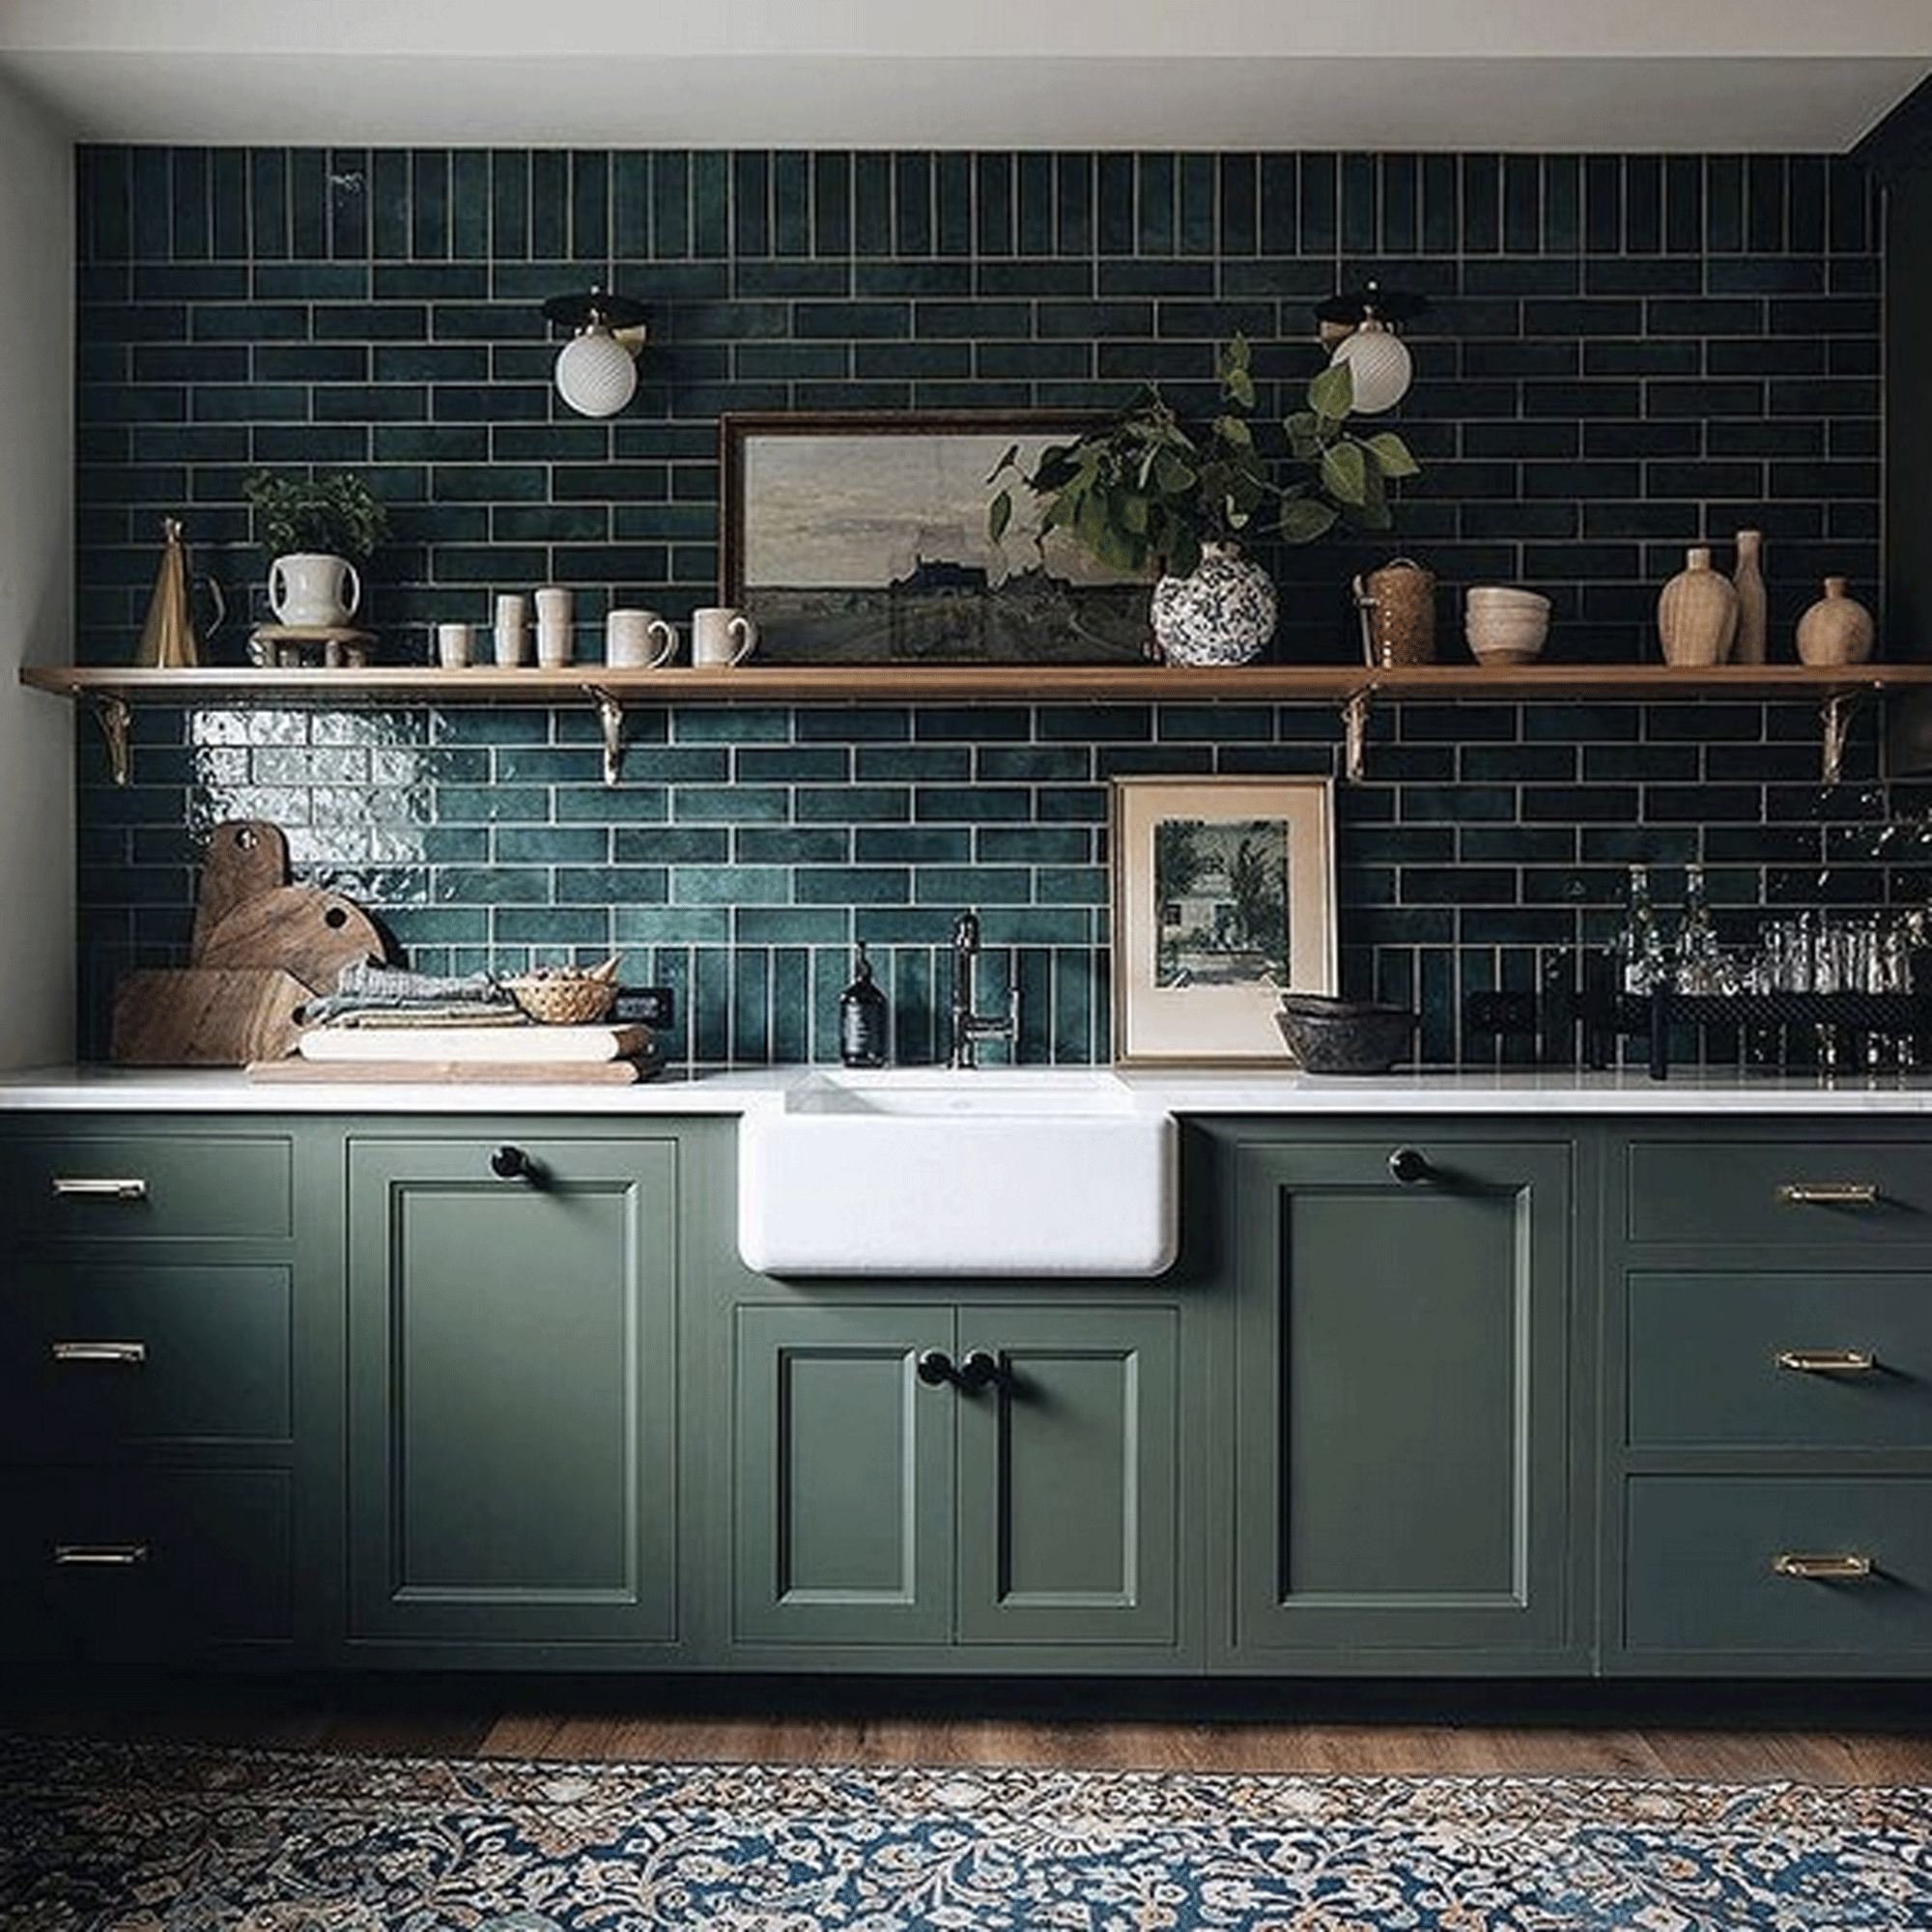 Green kitchen with green splashback and patterned rug